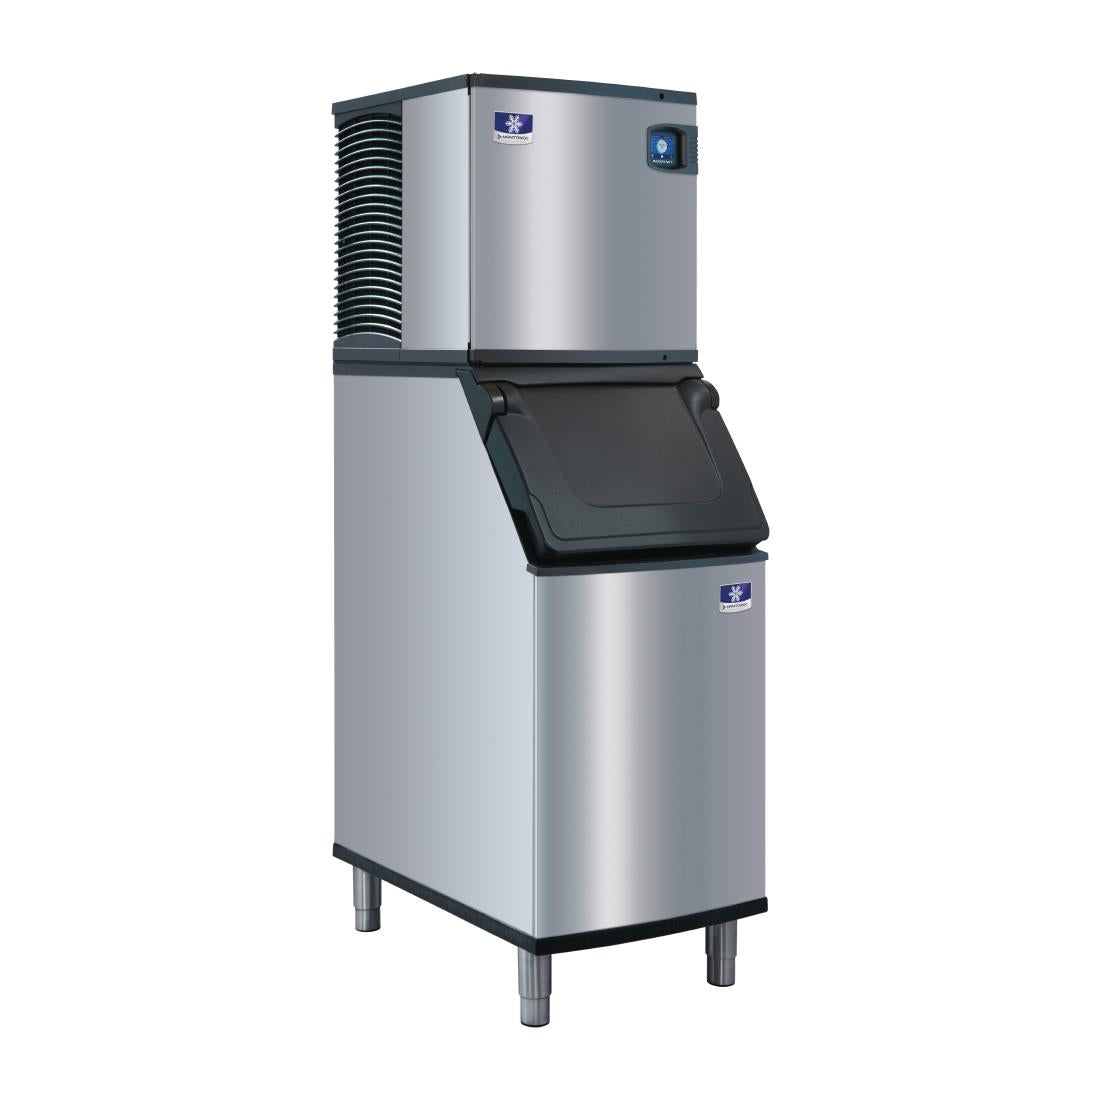 DW663 Manitowoc Indigo Modular Air-cooled Ice Maker IDT0620A with Storage Bin D420 JD Catering Equipment Solutions Ltd